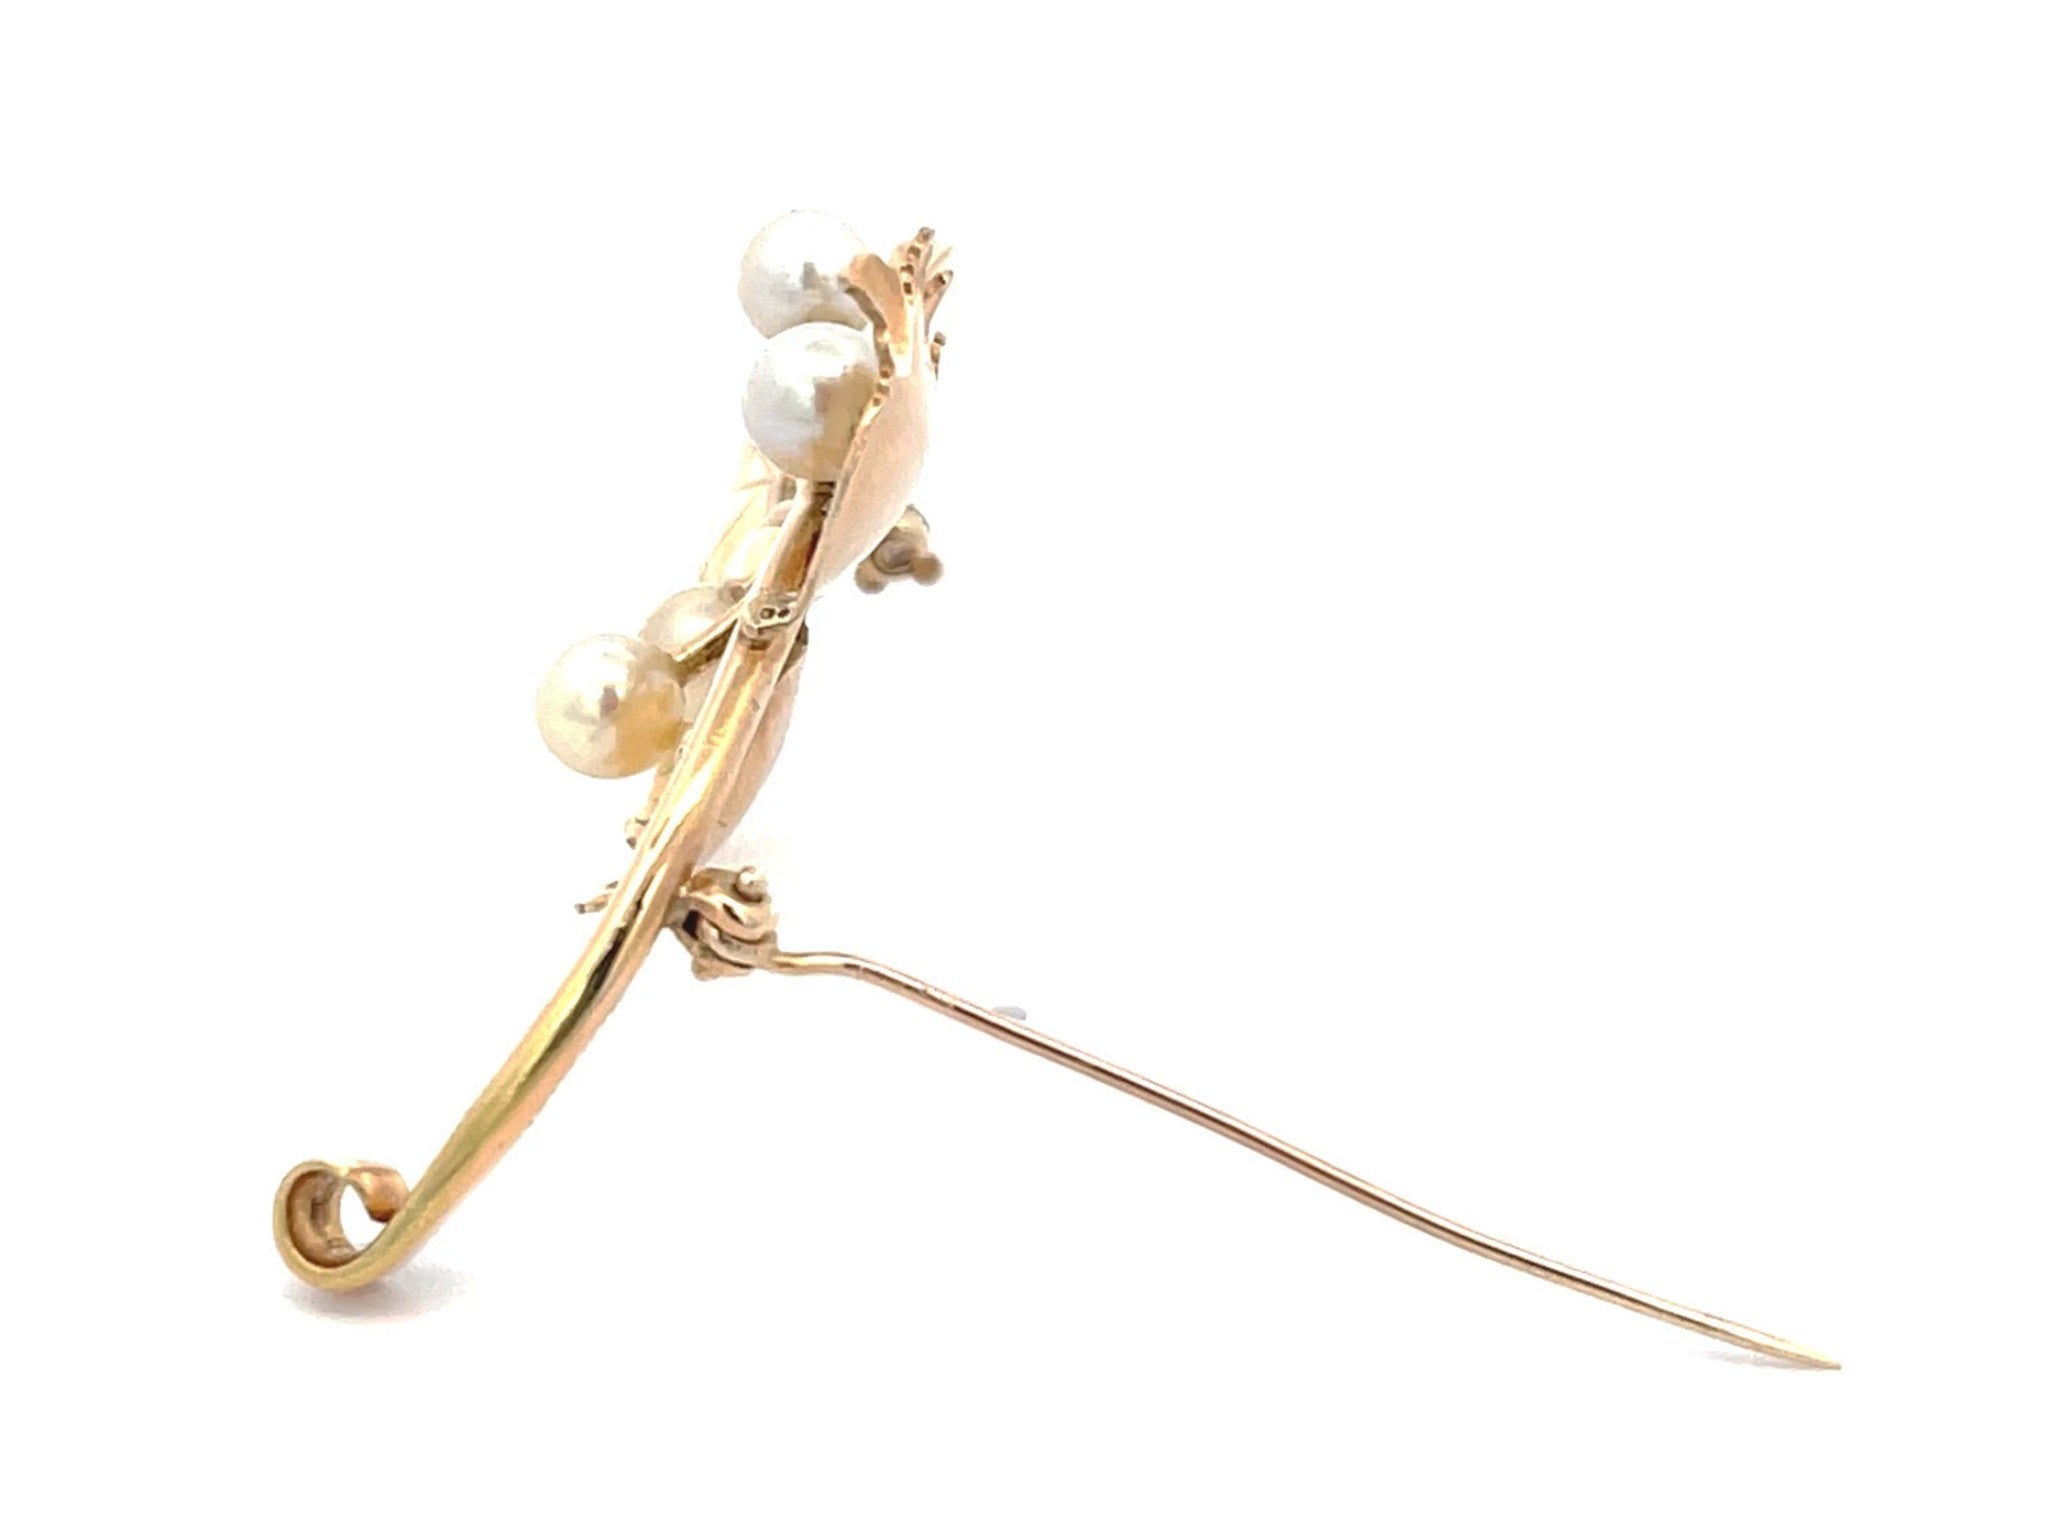 Mings Flower and Leaf Akoya Pearl Brooch in 14k Yellow Gold